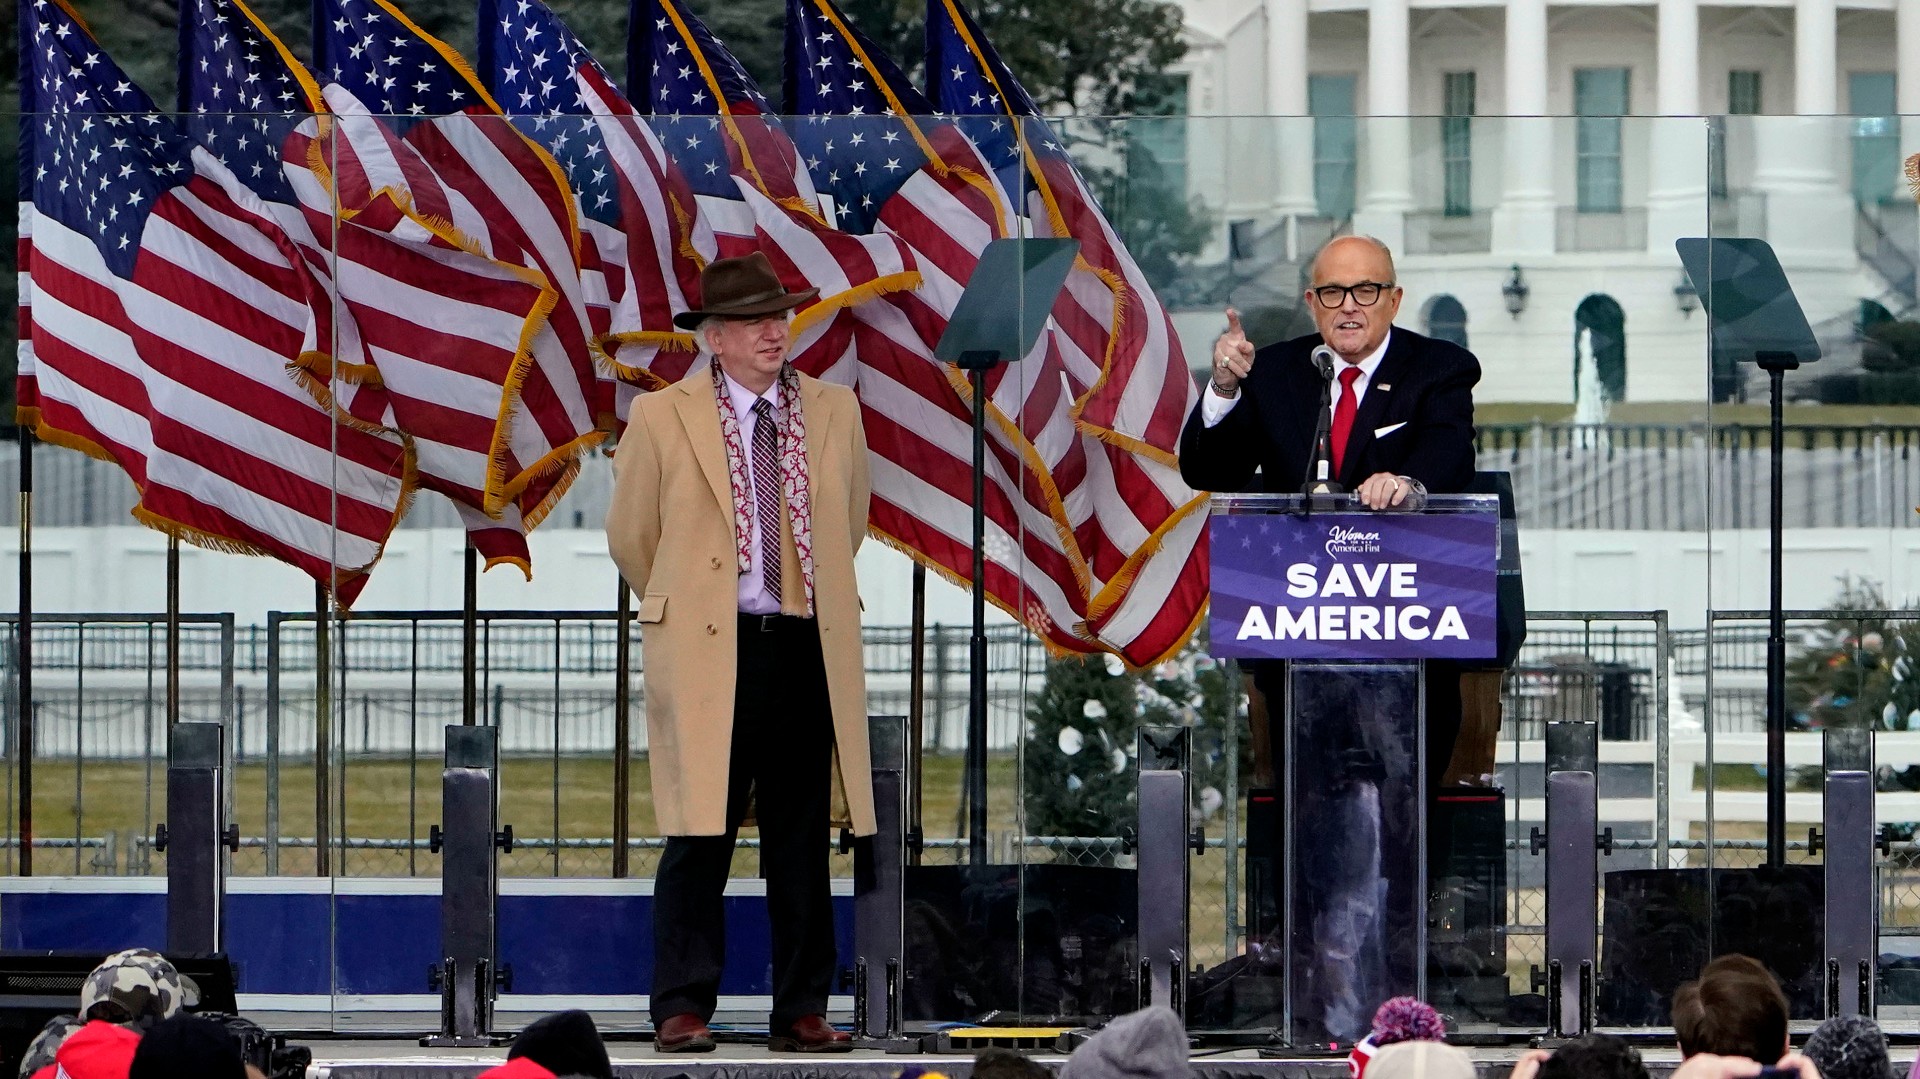 John Eastman stands at left as former New York Mayor Rudolph Giuliani speaks in Washington at a rally in support of President Donald Trump, called the "Save America Rally."